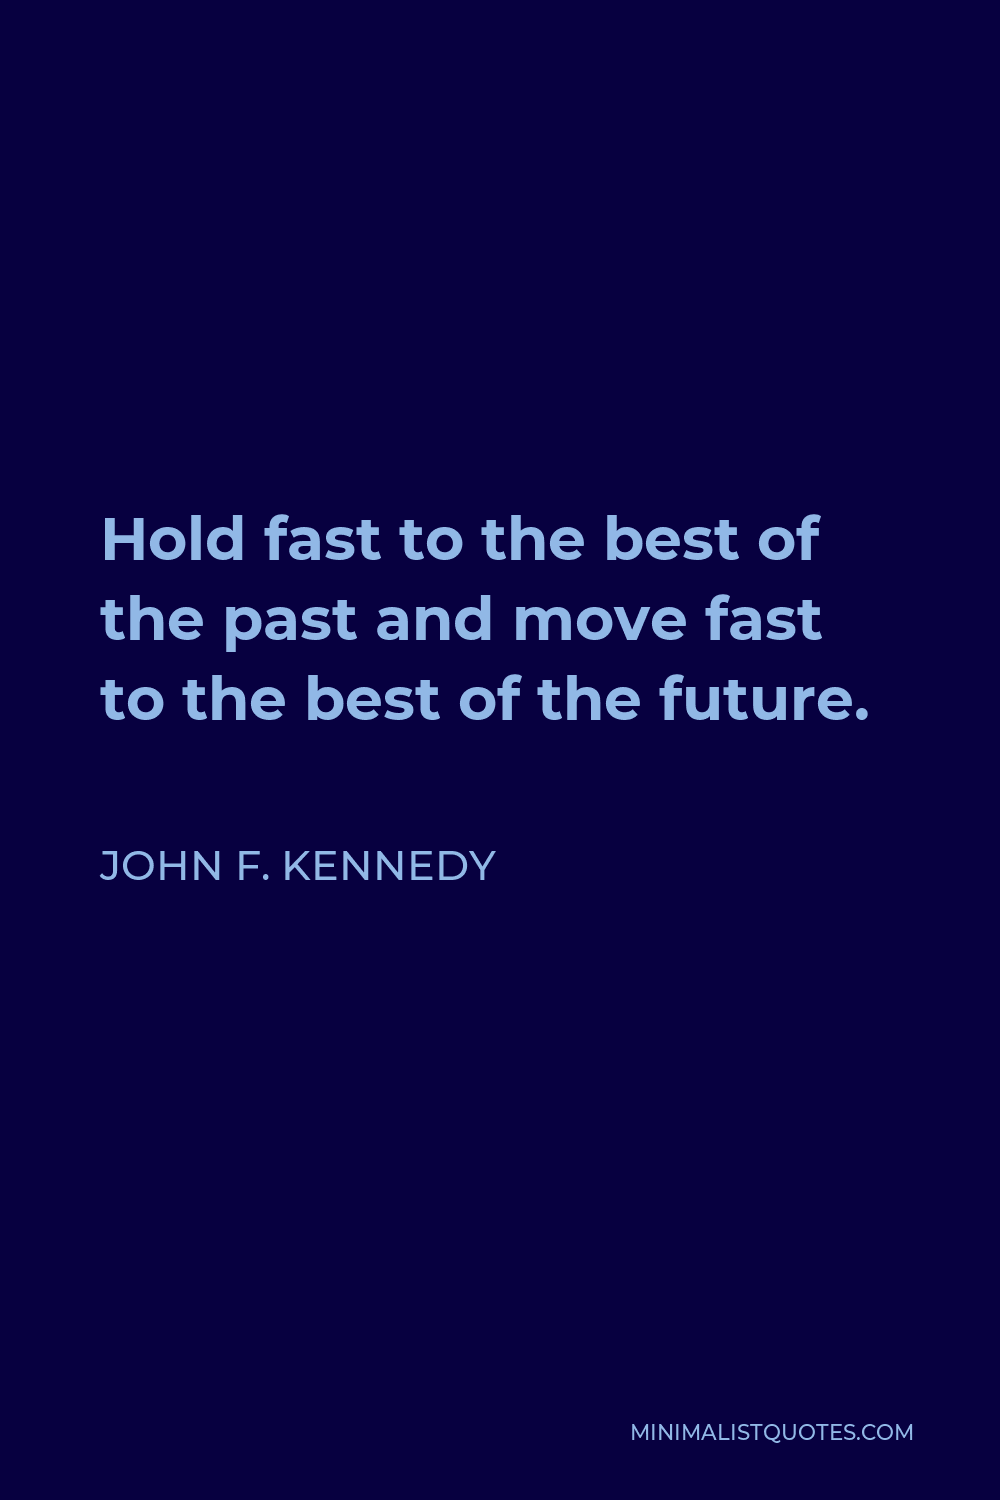 John F. Kennedy Quote - Hold fast to the best of the past and move fast to the best of the future.